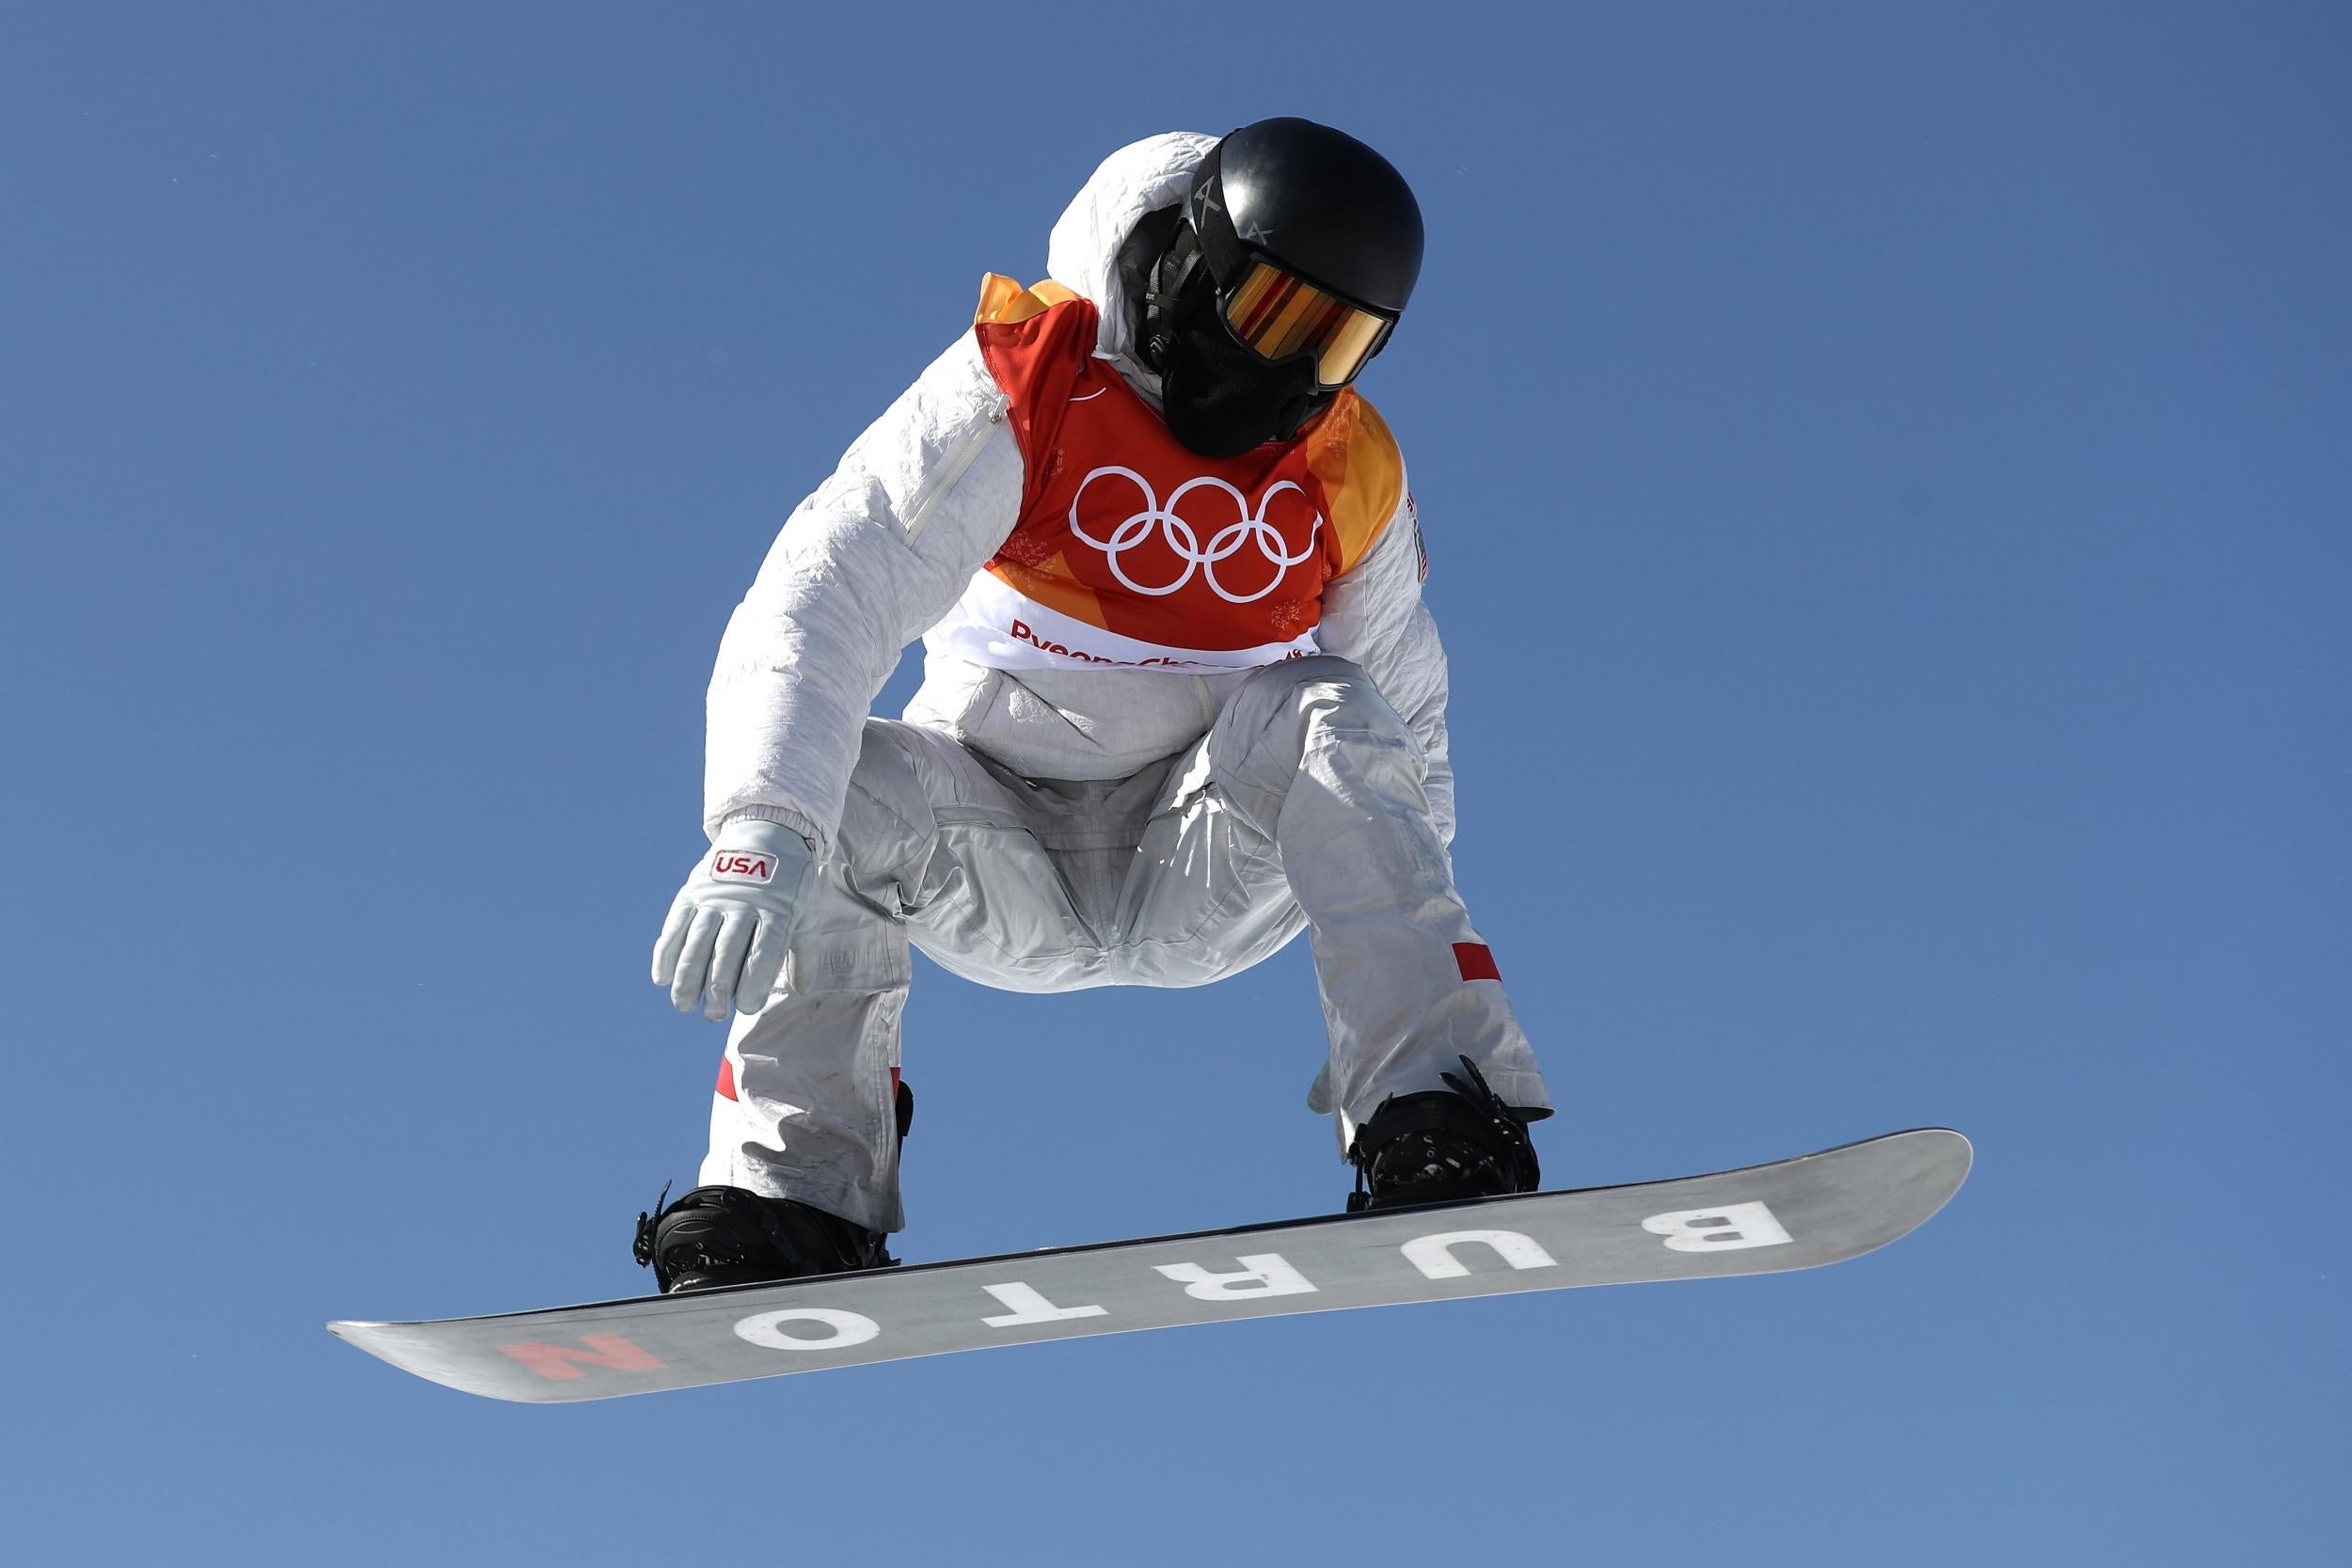 Shaun White warms up ahead of the Snowboard Men's Halfpipe Qualification at the PyeongChang 2018 Winter Olympic Games